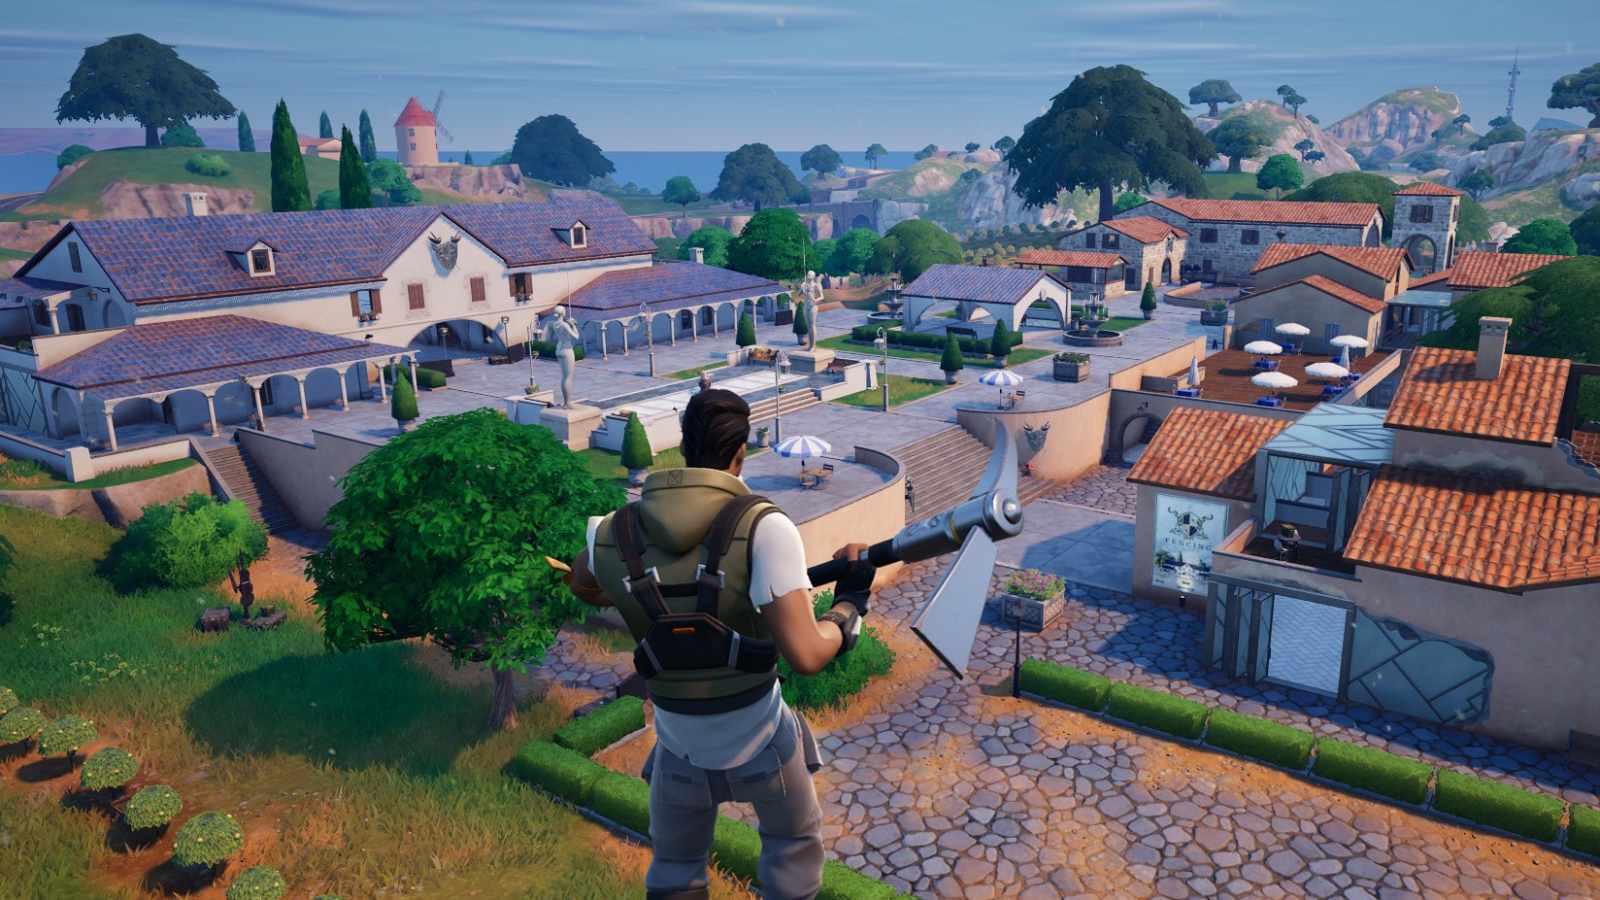 Fortnite players poke fun at game’s “stupid” Match Quests - Dexerto